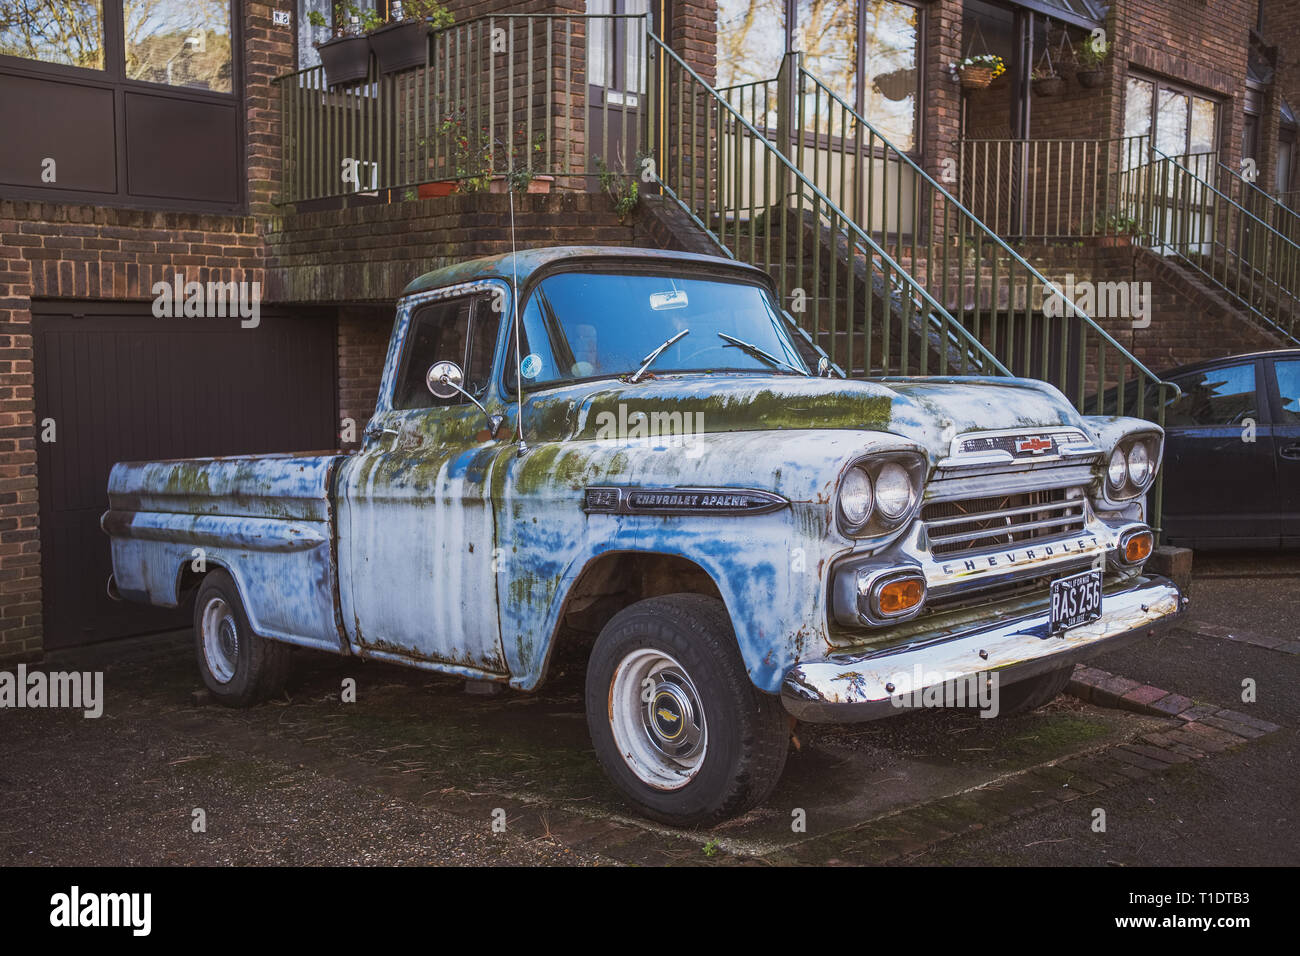 London, UK: old Chevrolet pickup looks out of place in the Richmond district. Stock Photo